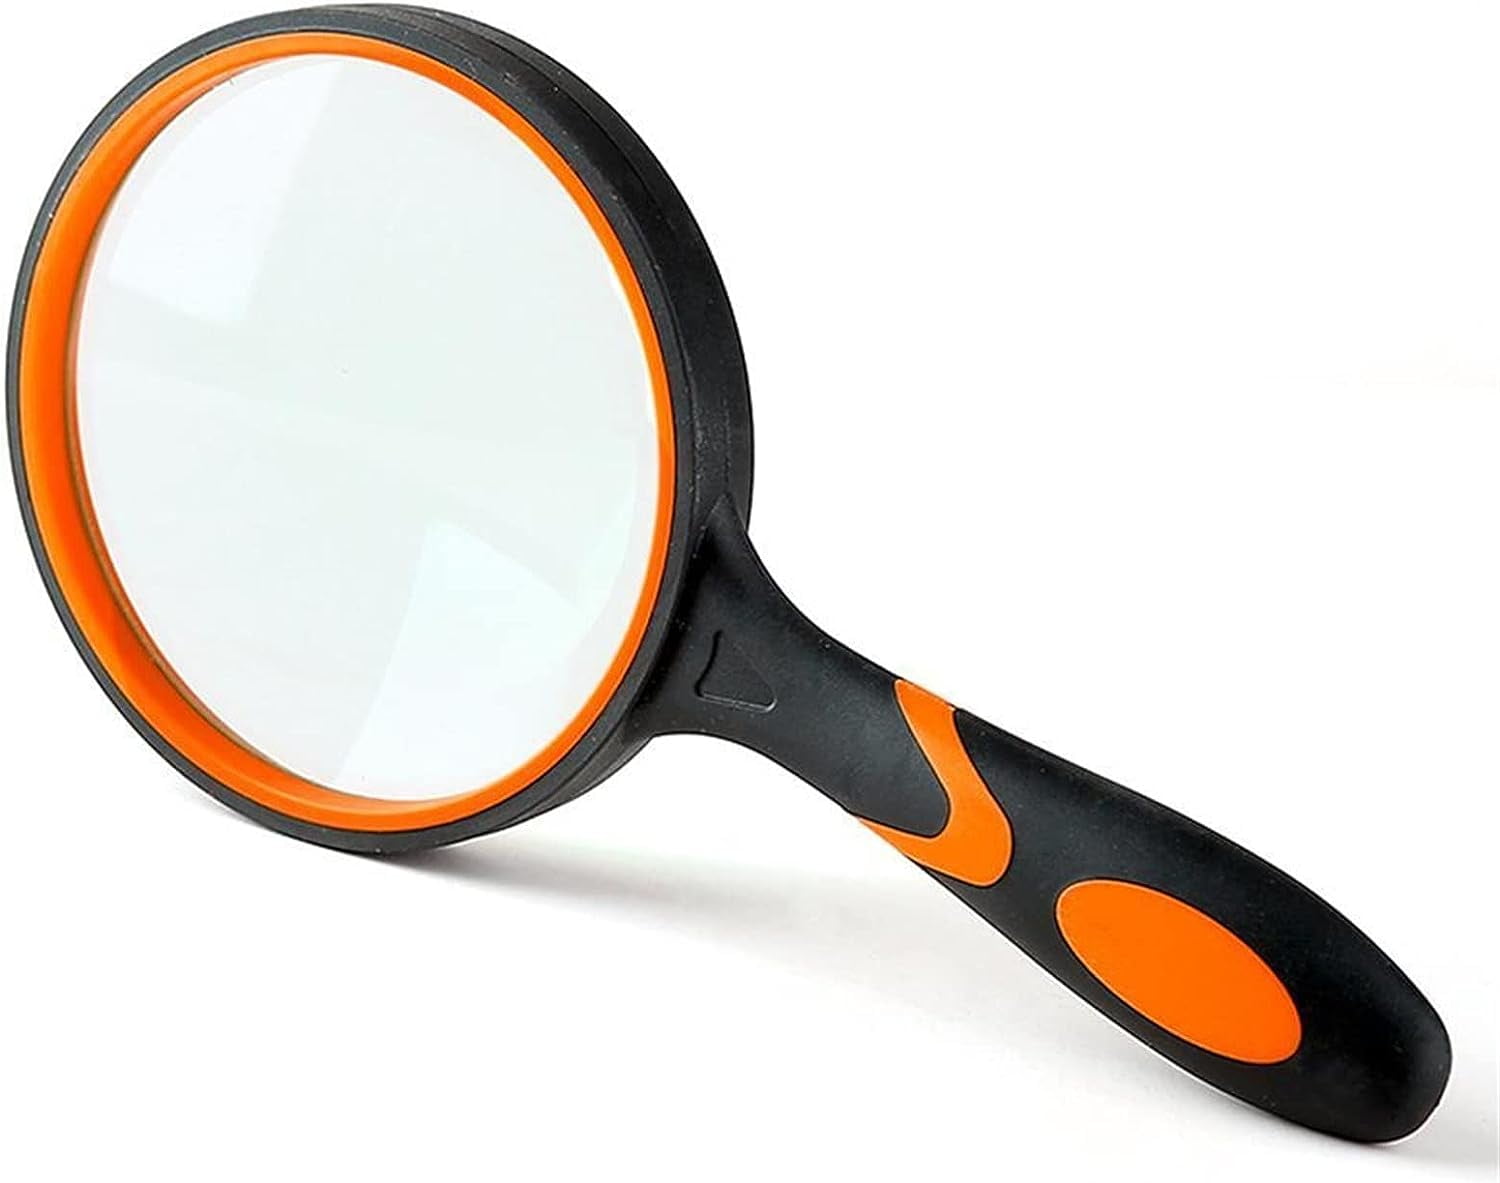 Portable Handheld High Definition Magnifier Magnifying Glass For Reading  Books, Maps, And Newspapers 10X Lens Eye Loupe From Pingwang3, $56.29